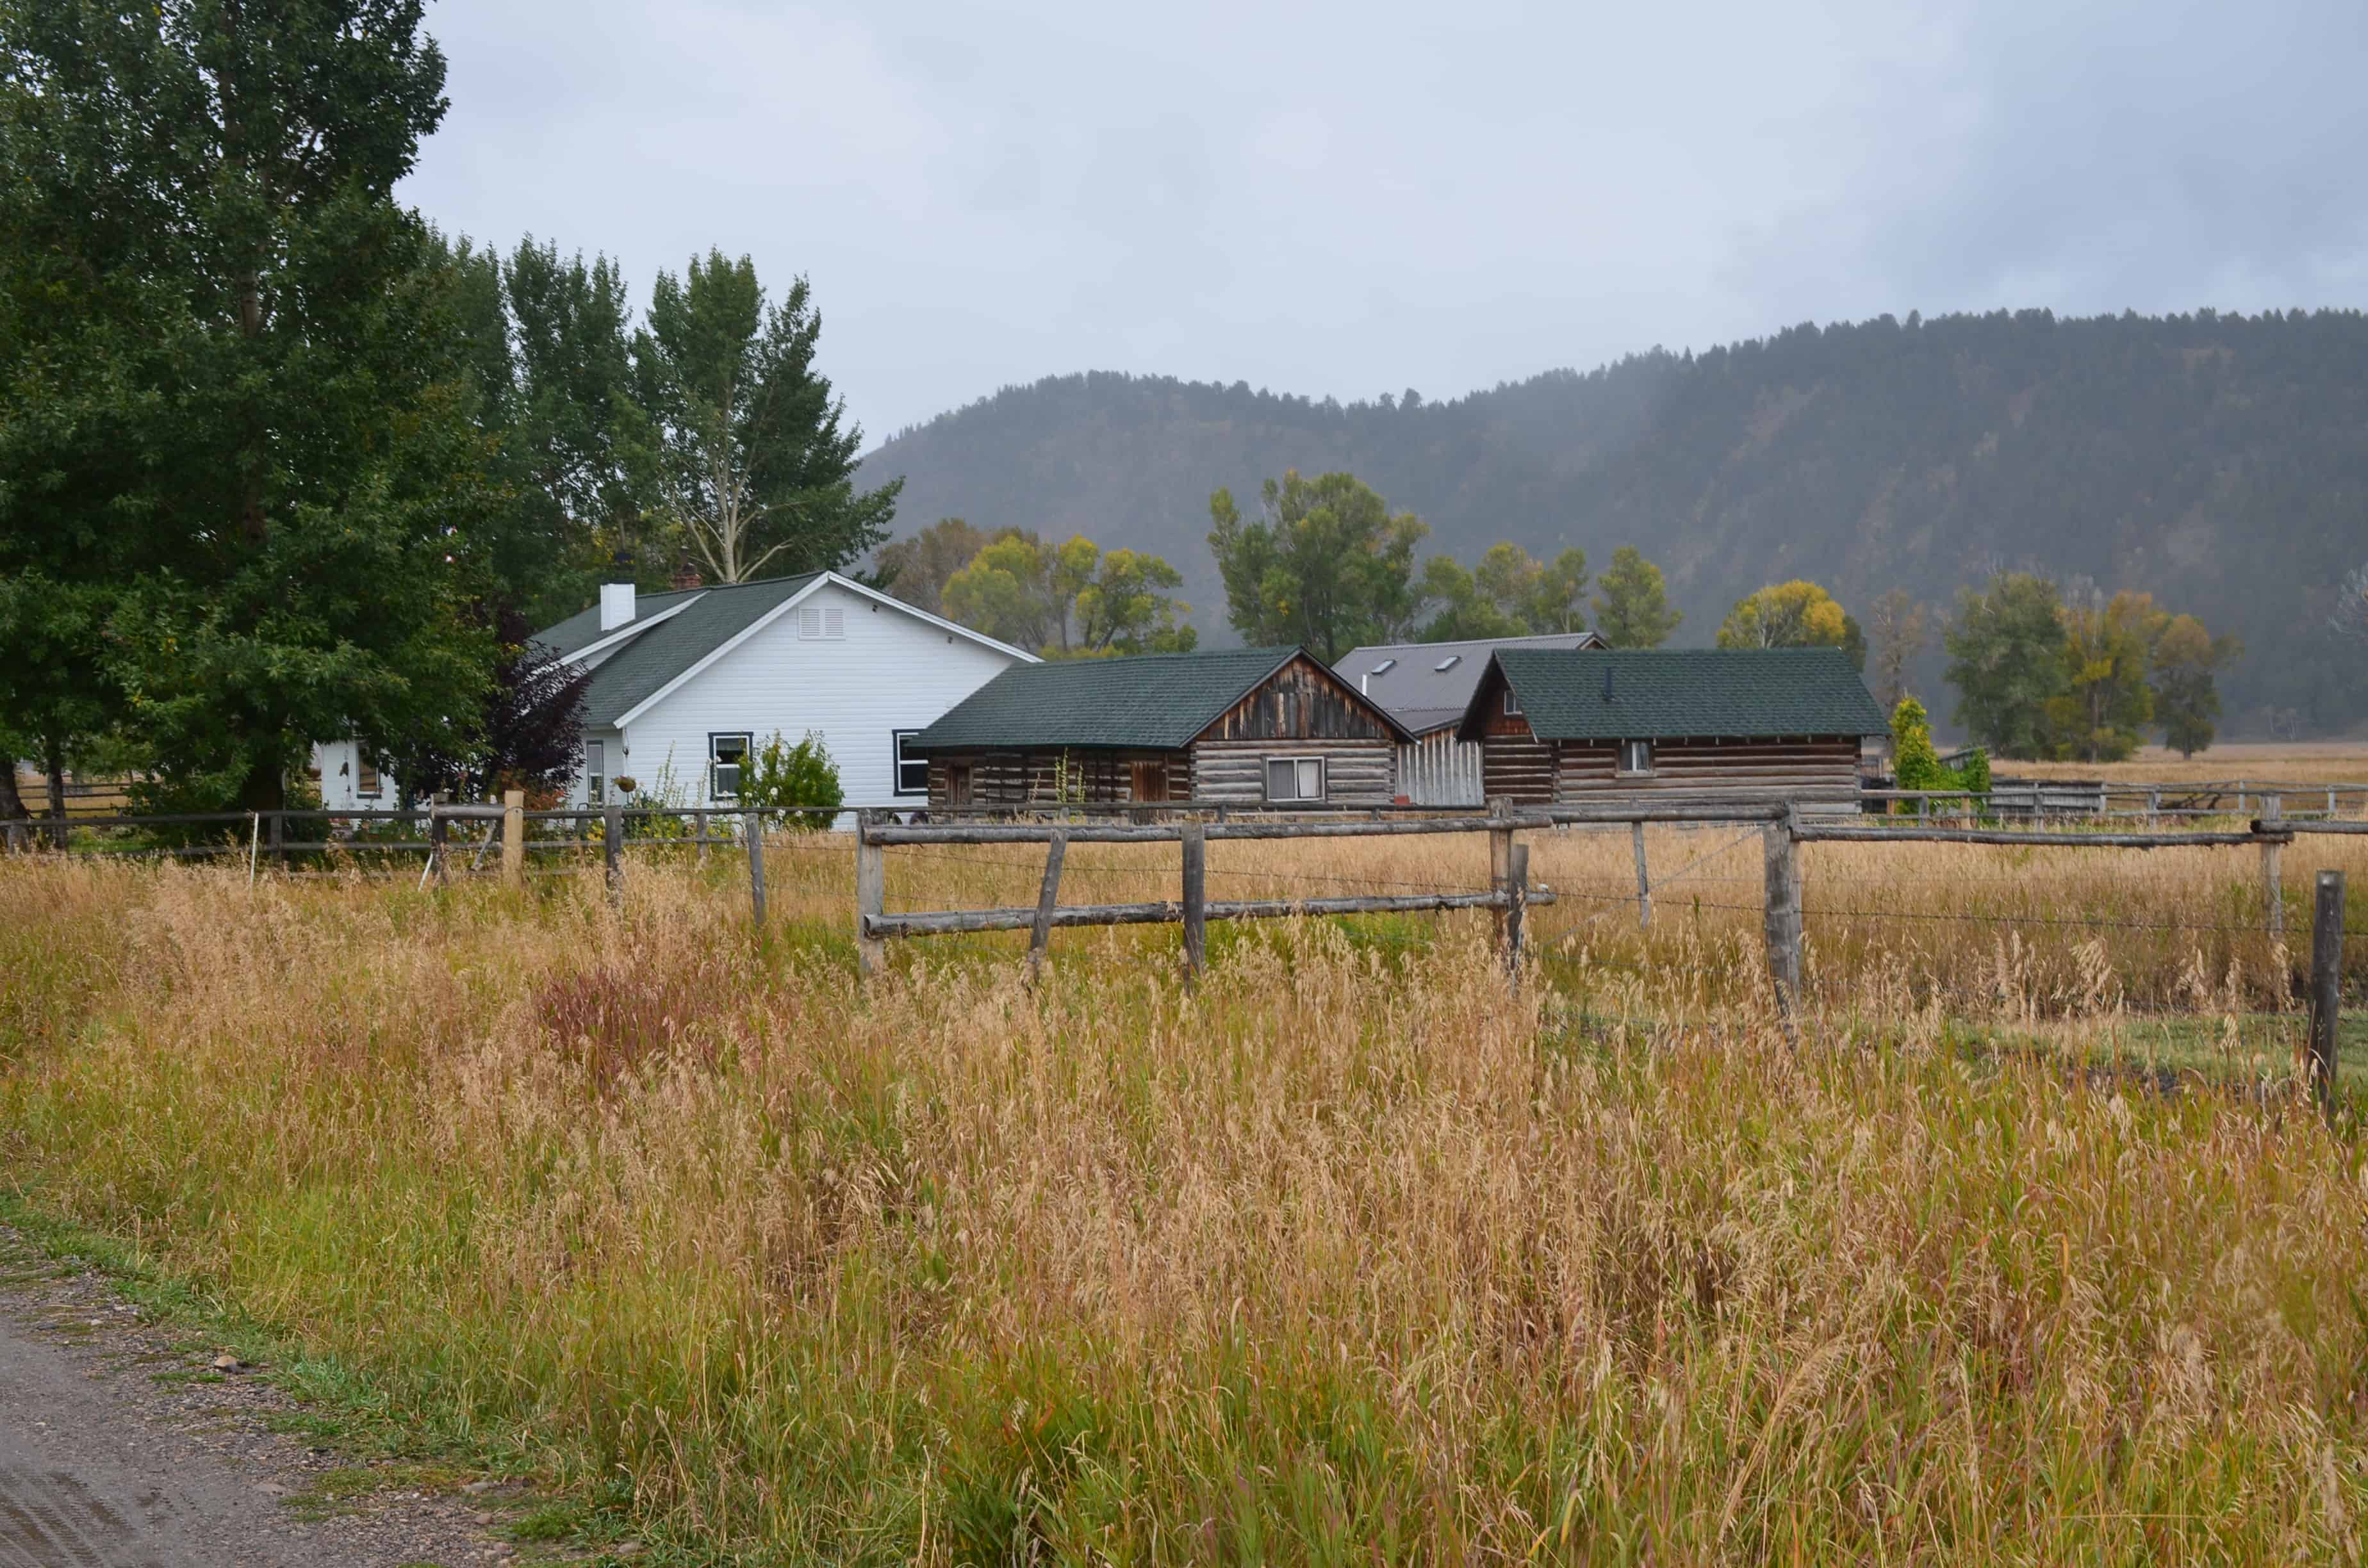 Clark and Veda Moulton Homestead on Mormon Row in Grand Teton National Park, Wyoming